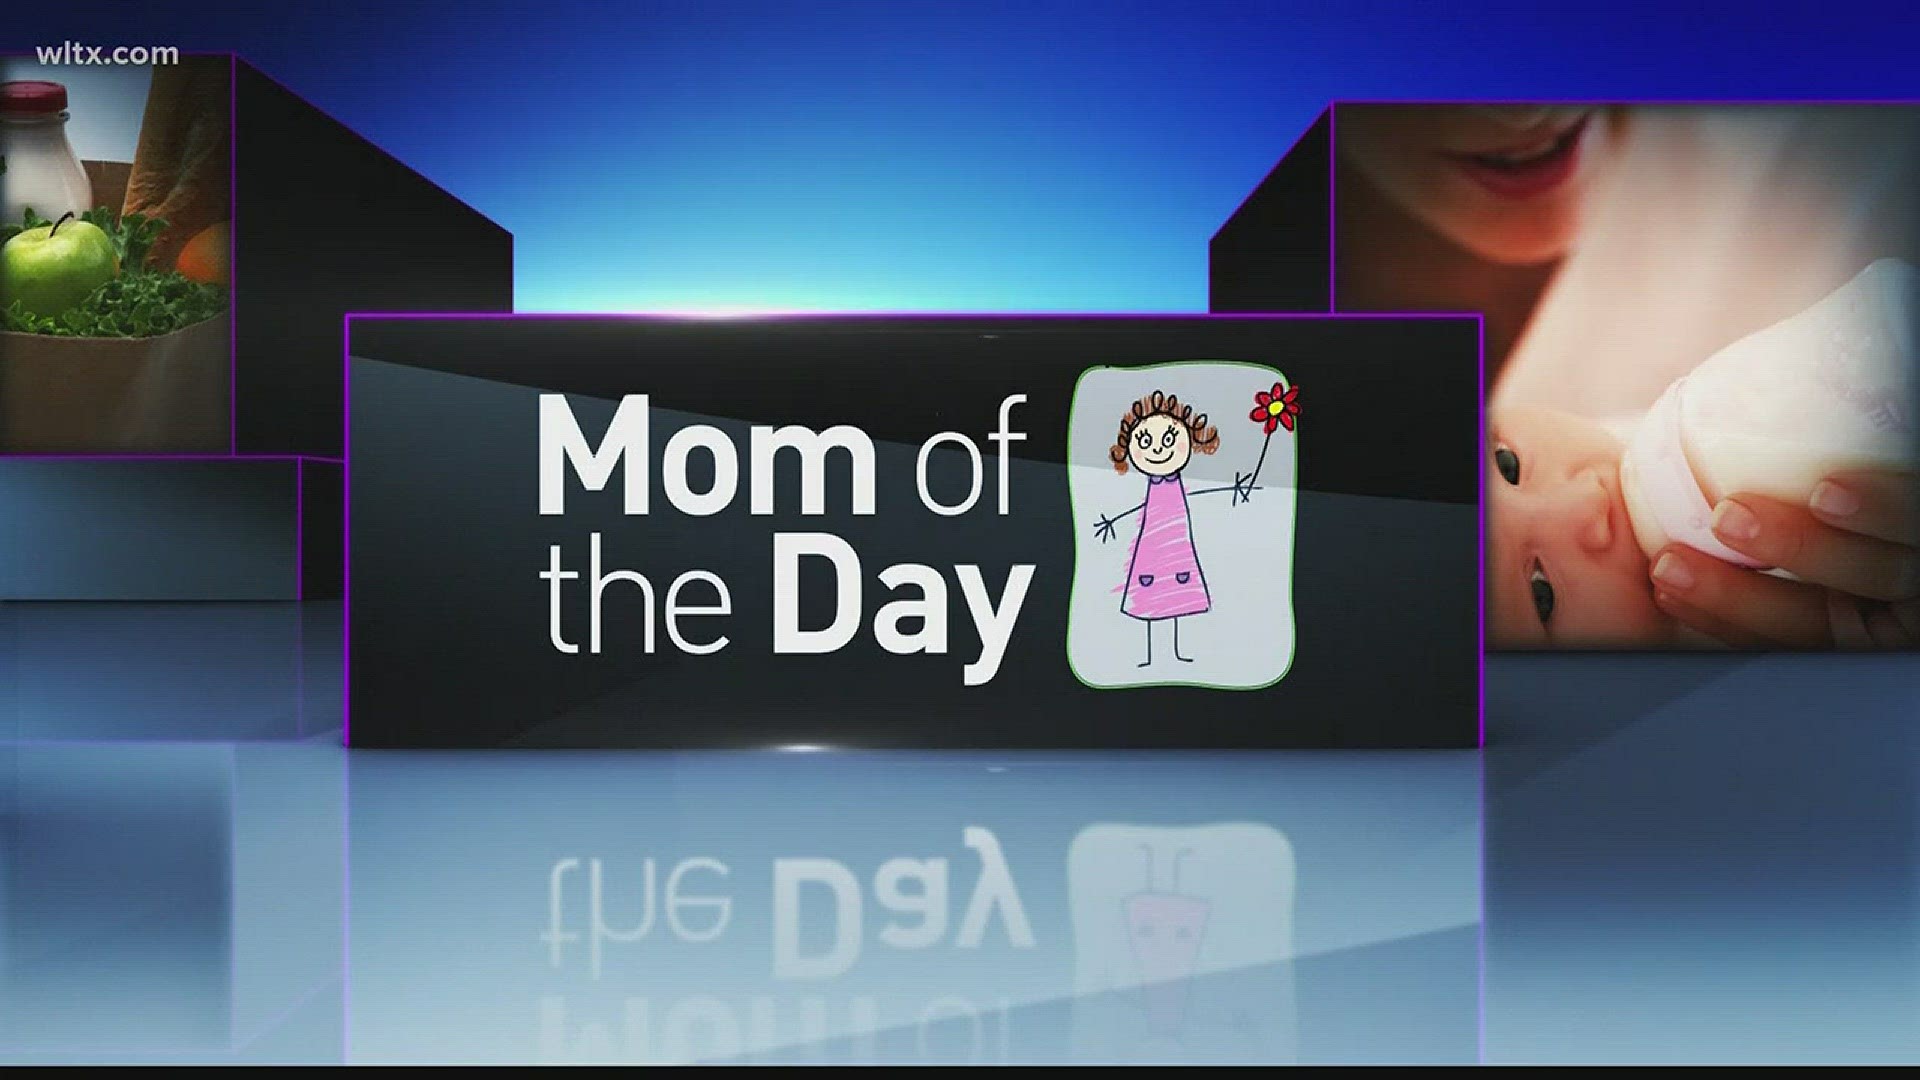 Meet News 19's MOM OF THE DAY, Berthel Oliver, who was nominated by her grandson Desmon.